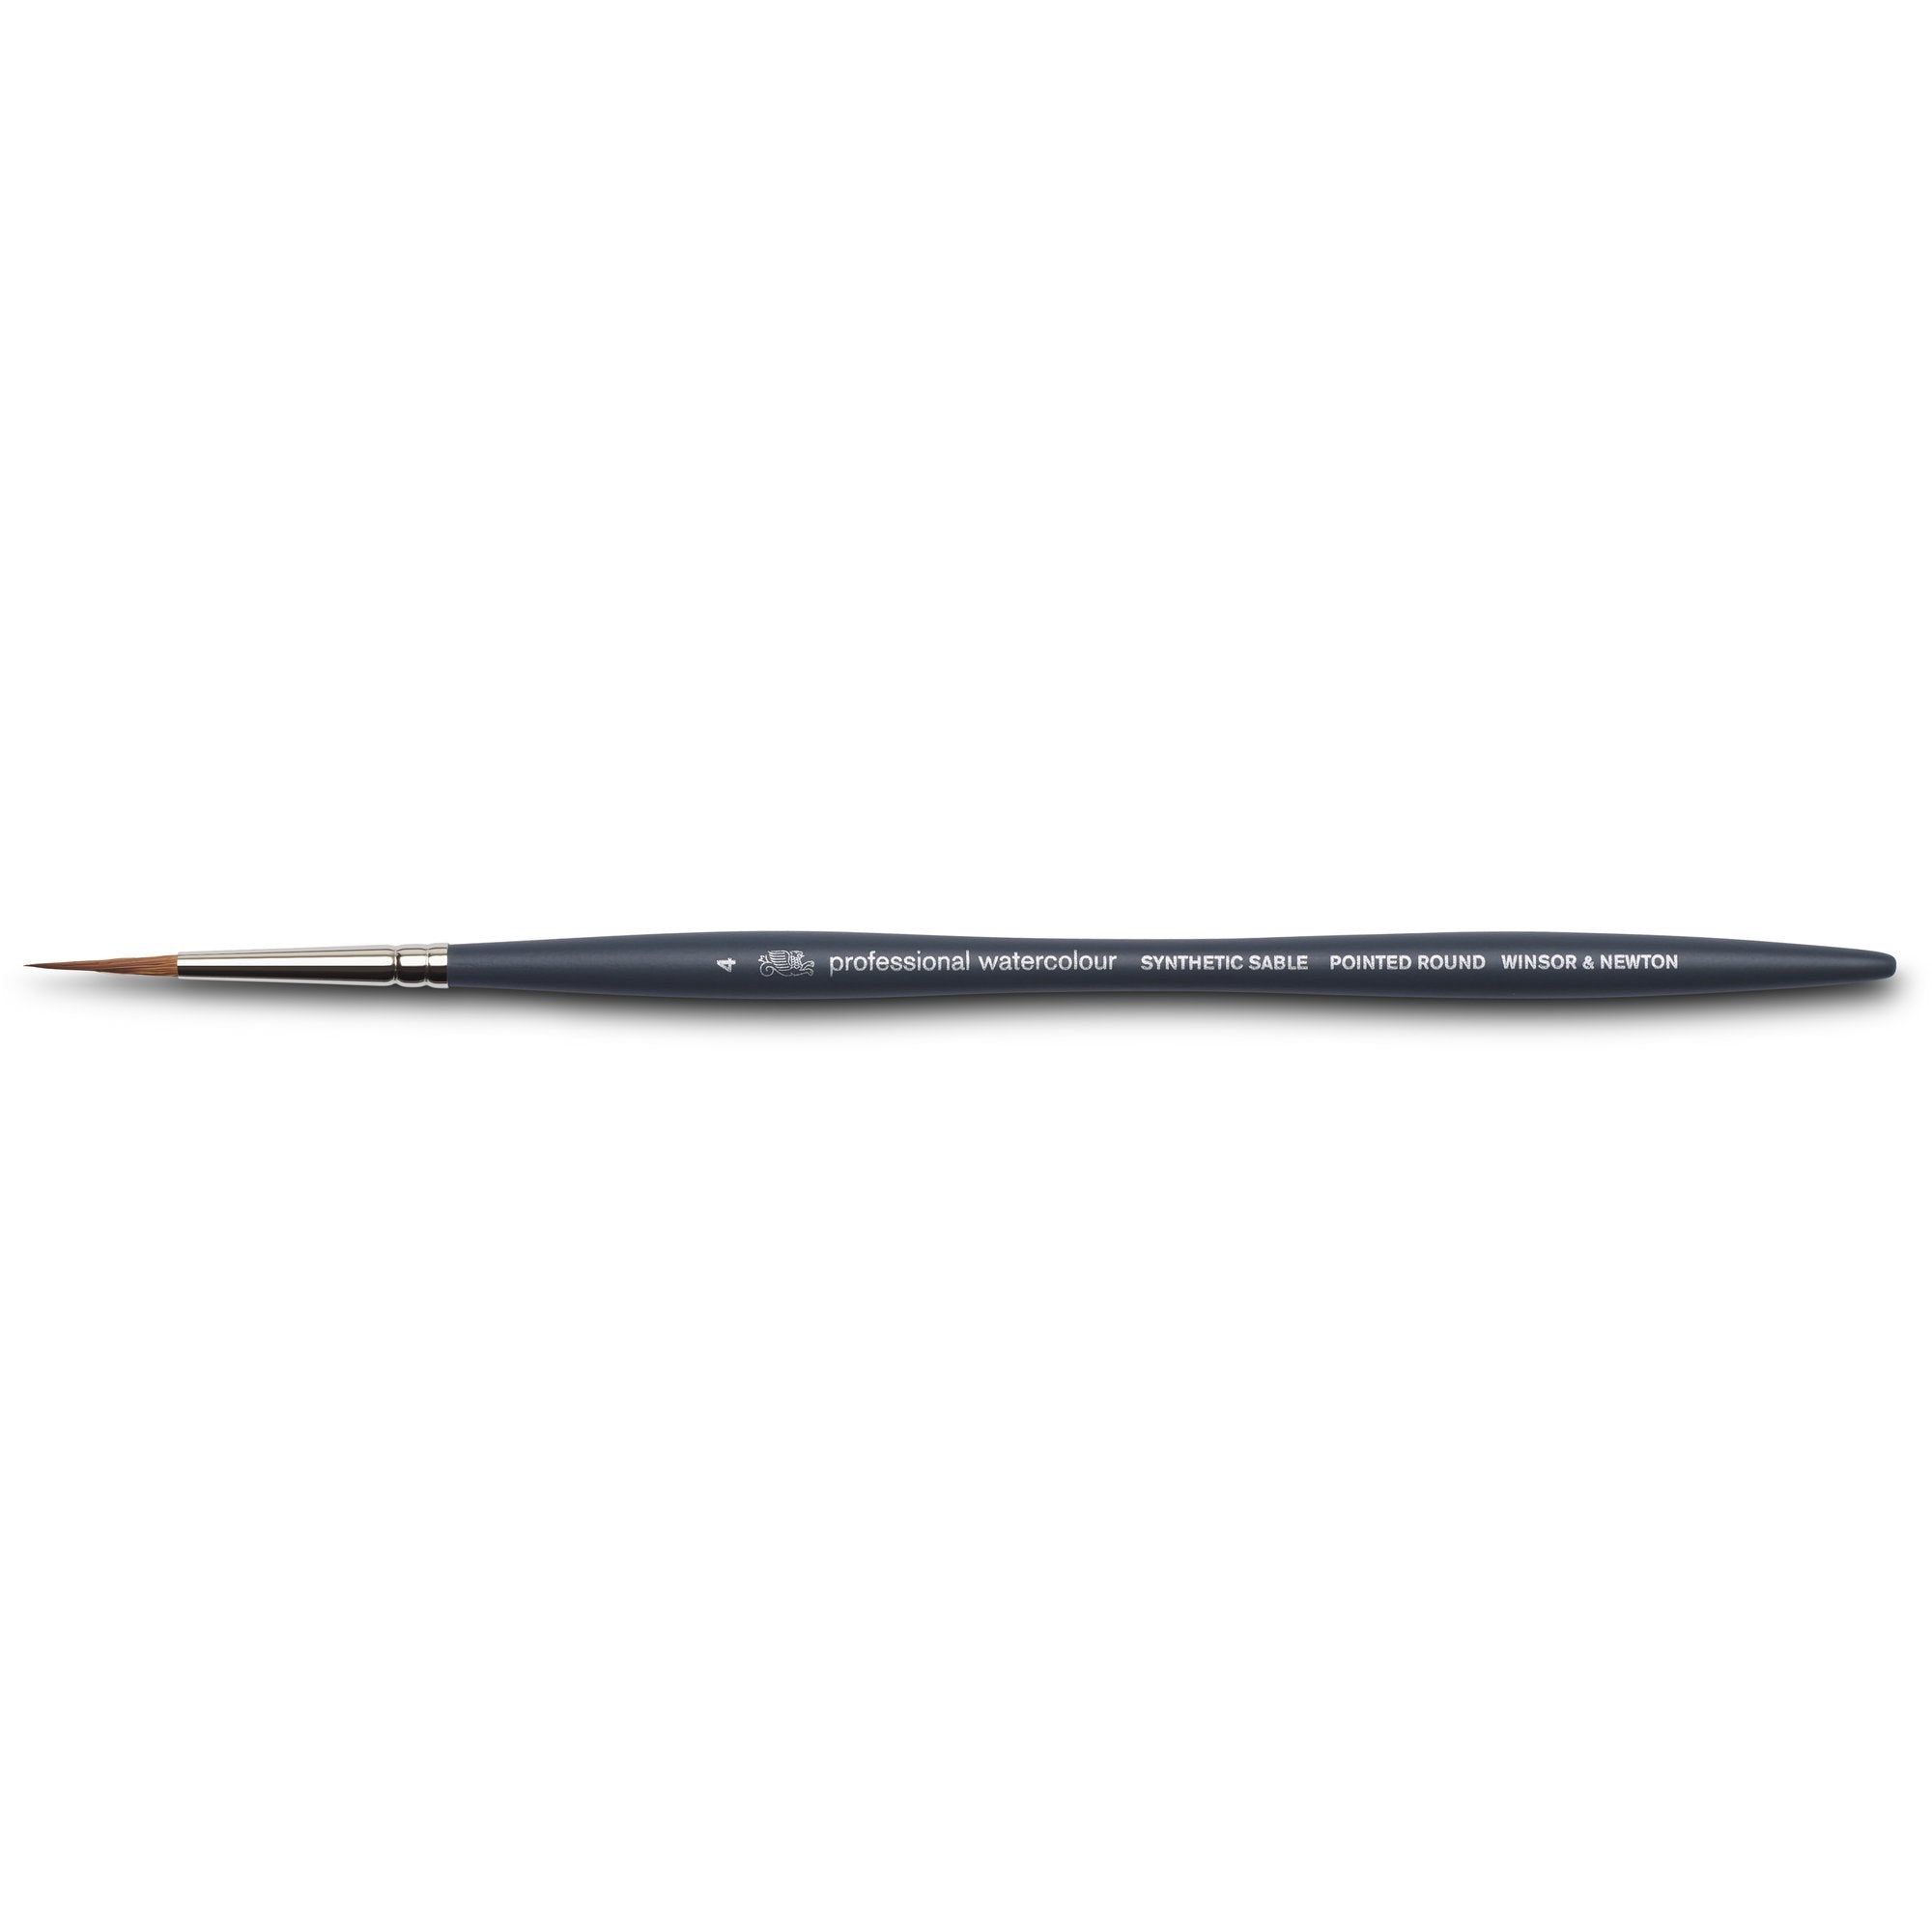 Winsor & Newton Professional Watercolour Synthetic Sable Brush Pointed Round 4